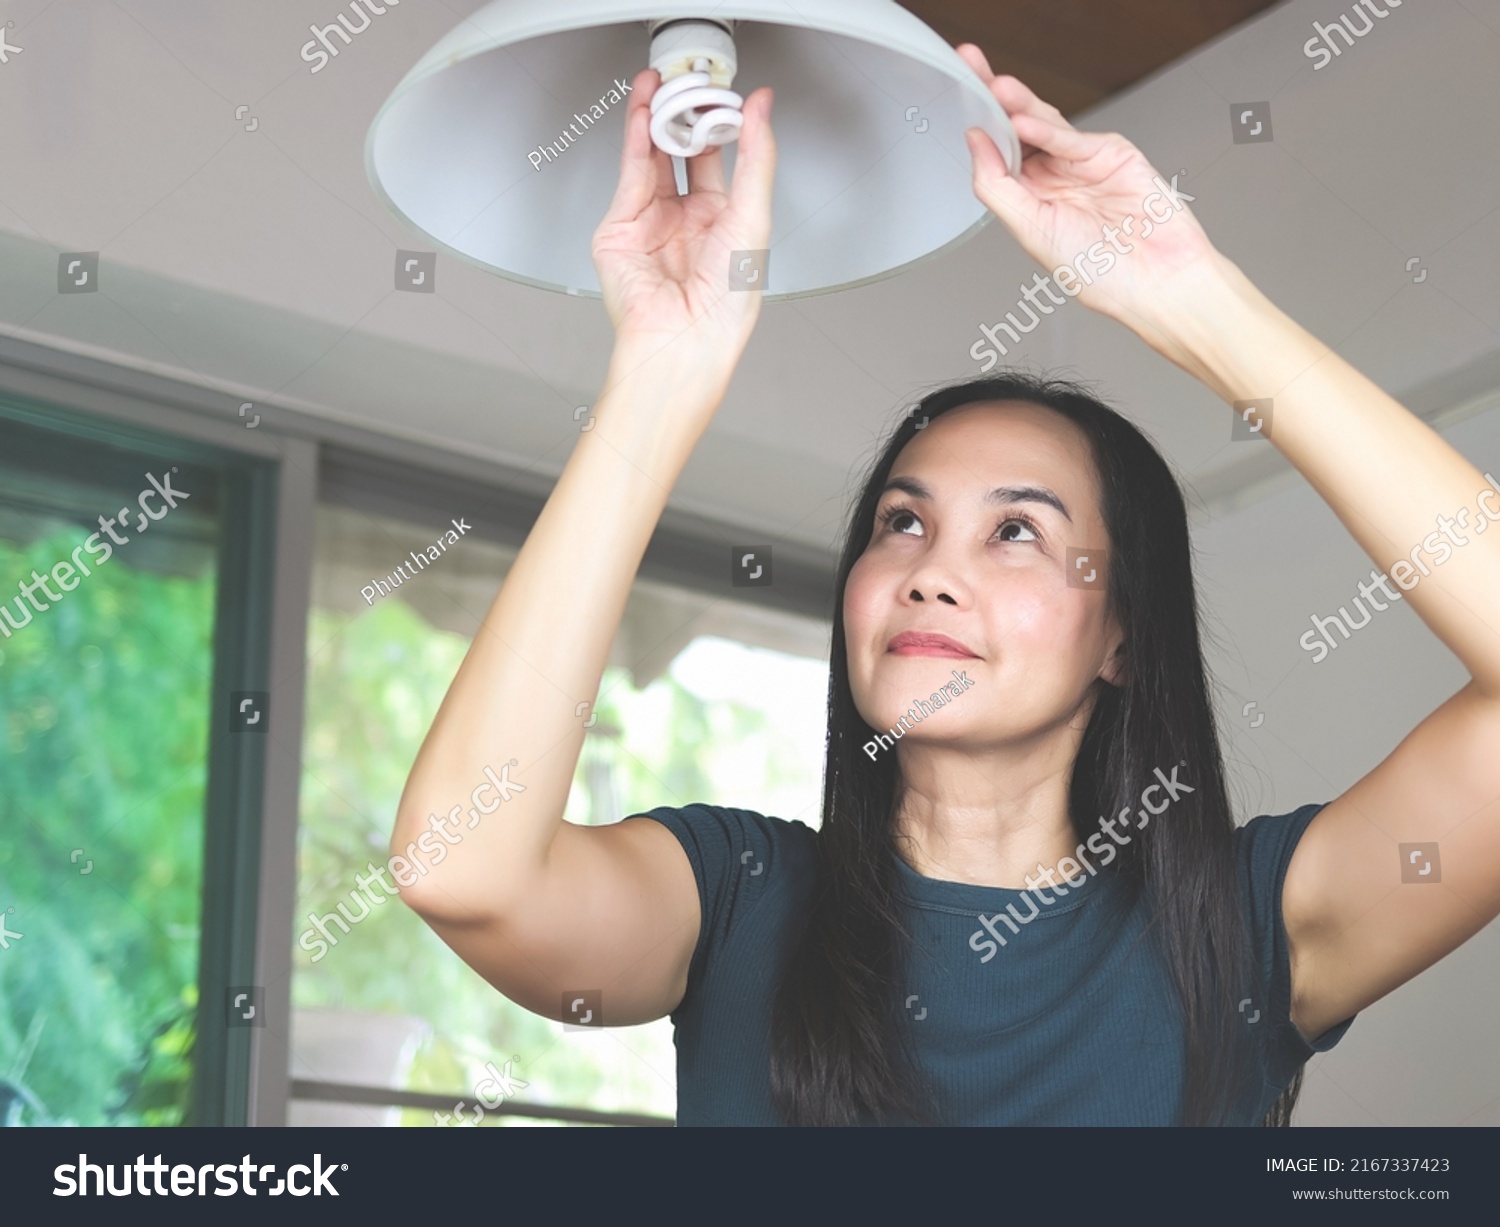 she fingers her can up to the ceiling!